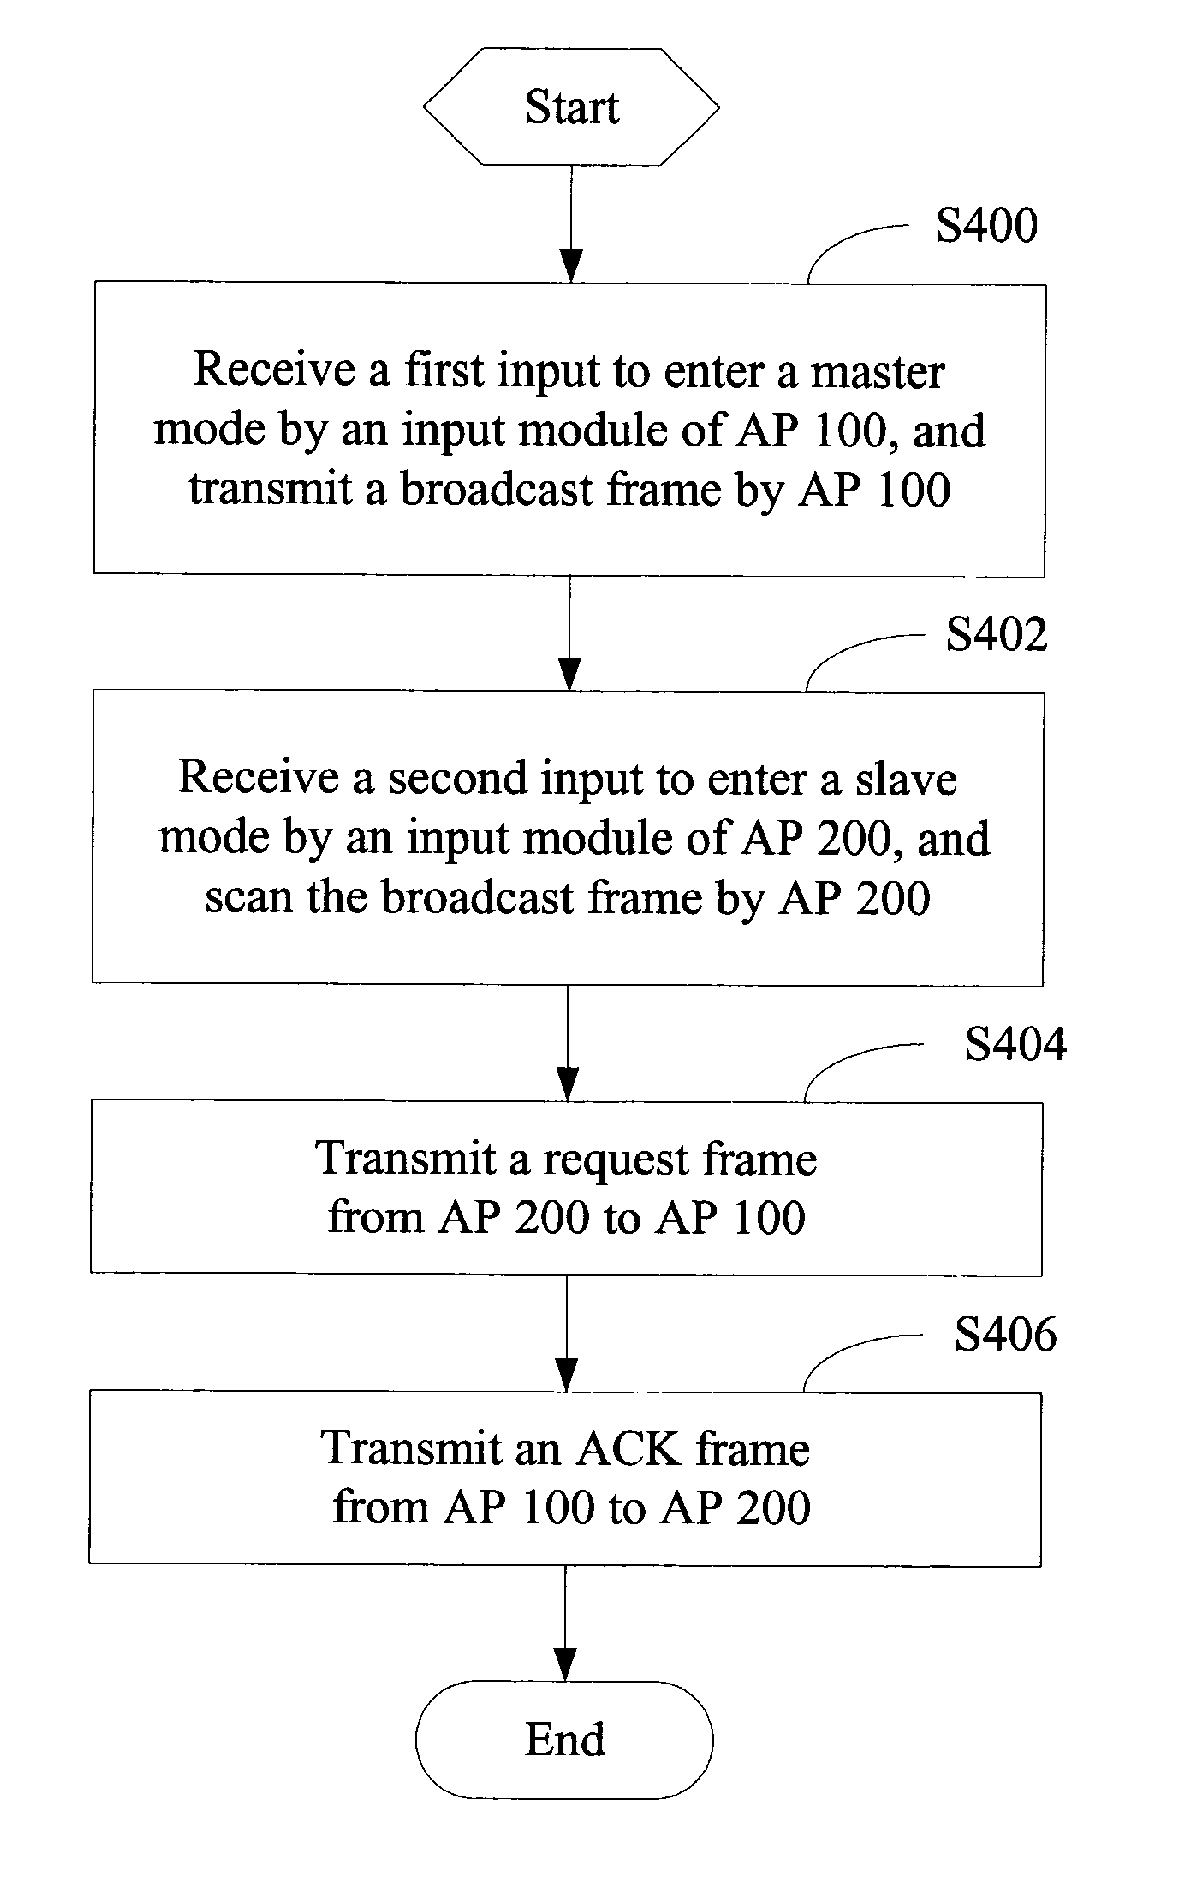 Access point and method for establishing a wireless distribution system link between access points